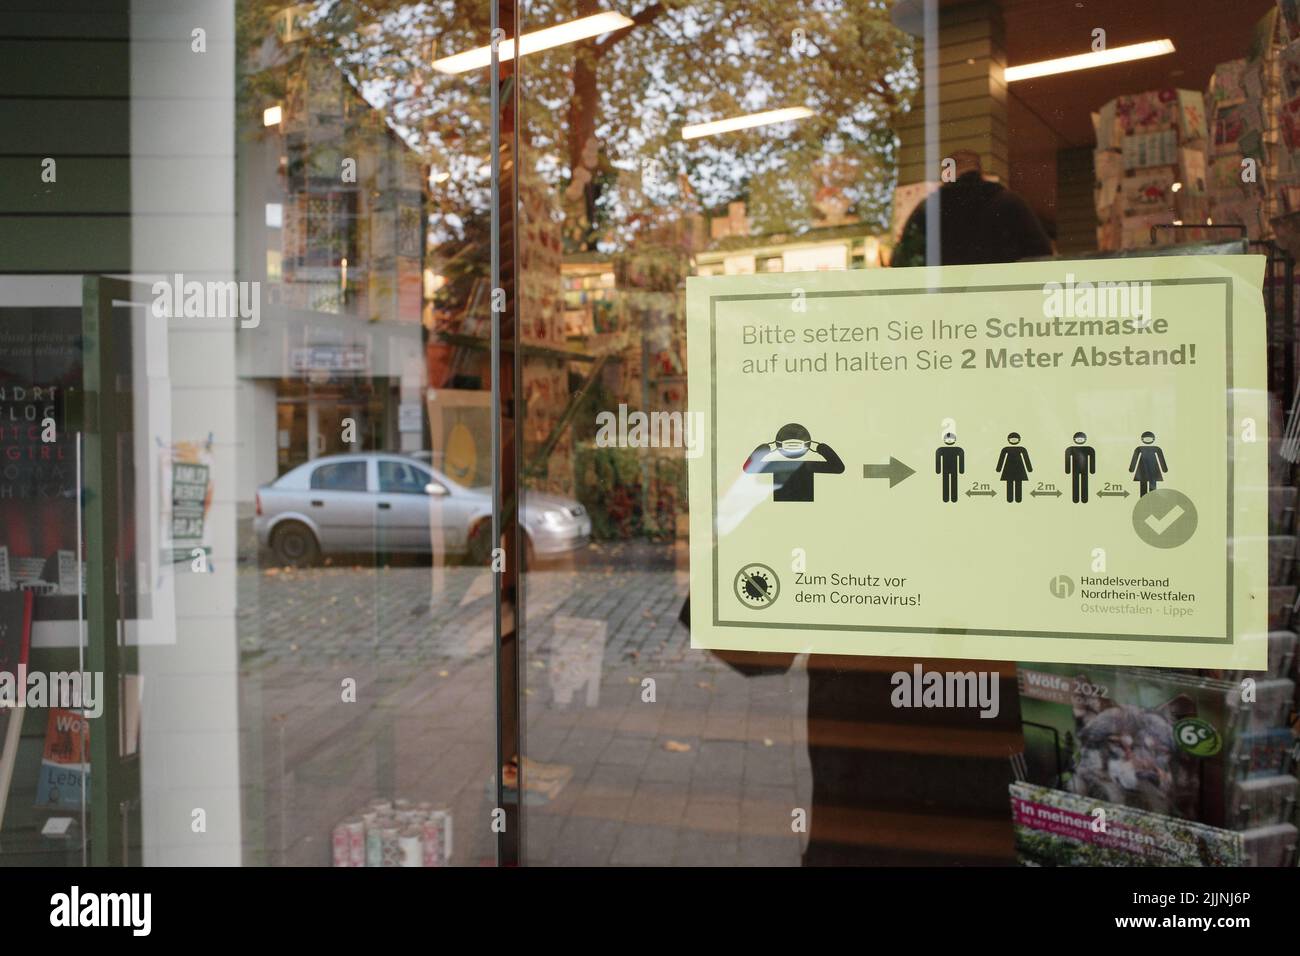 A COVID 19 code of conduct notice on a shop door in Bielefeld., Germany Stock Photo